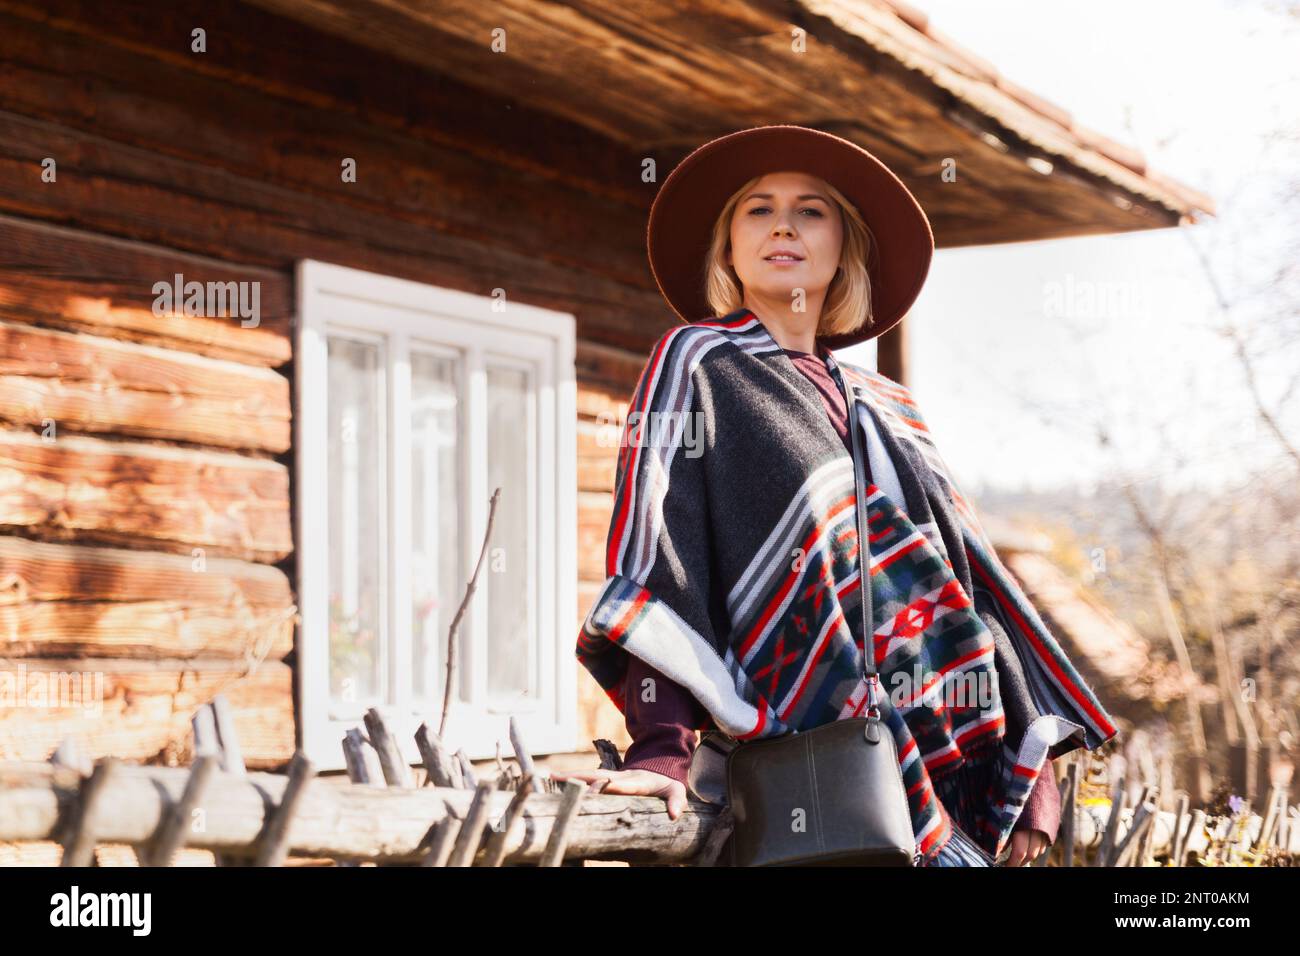 Stylish hipster traveling woman wearing  authentic boho chic style poncho and hat near old wooden countryside buildings Woman exploring nature in autu Stock Photo